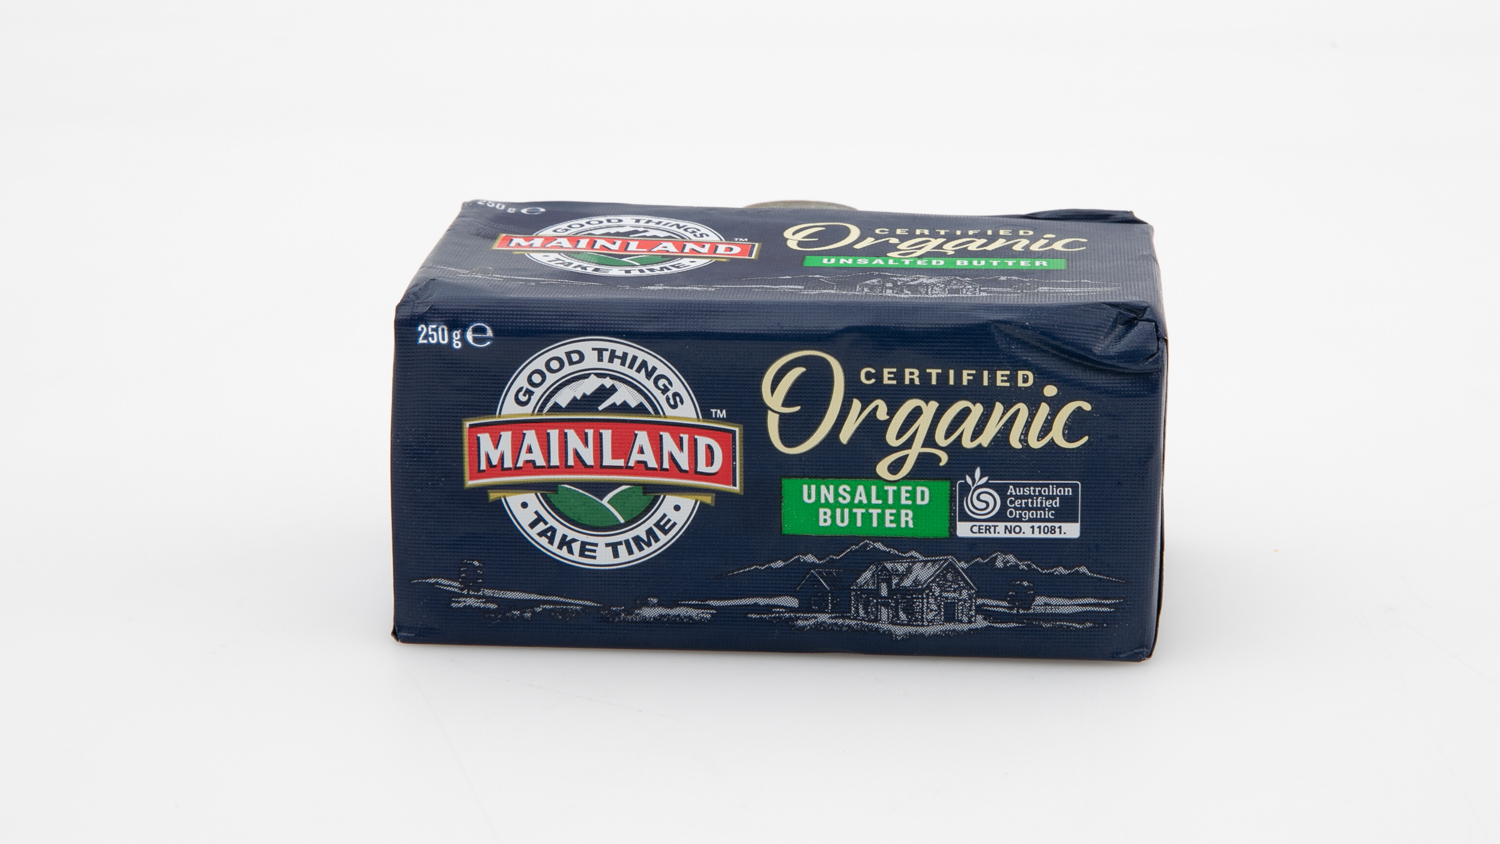 Mainland Certified Organic Unsalted Butter carousel image